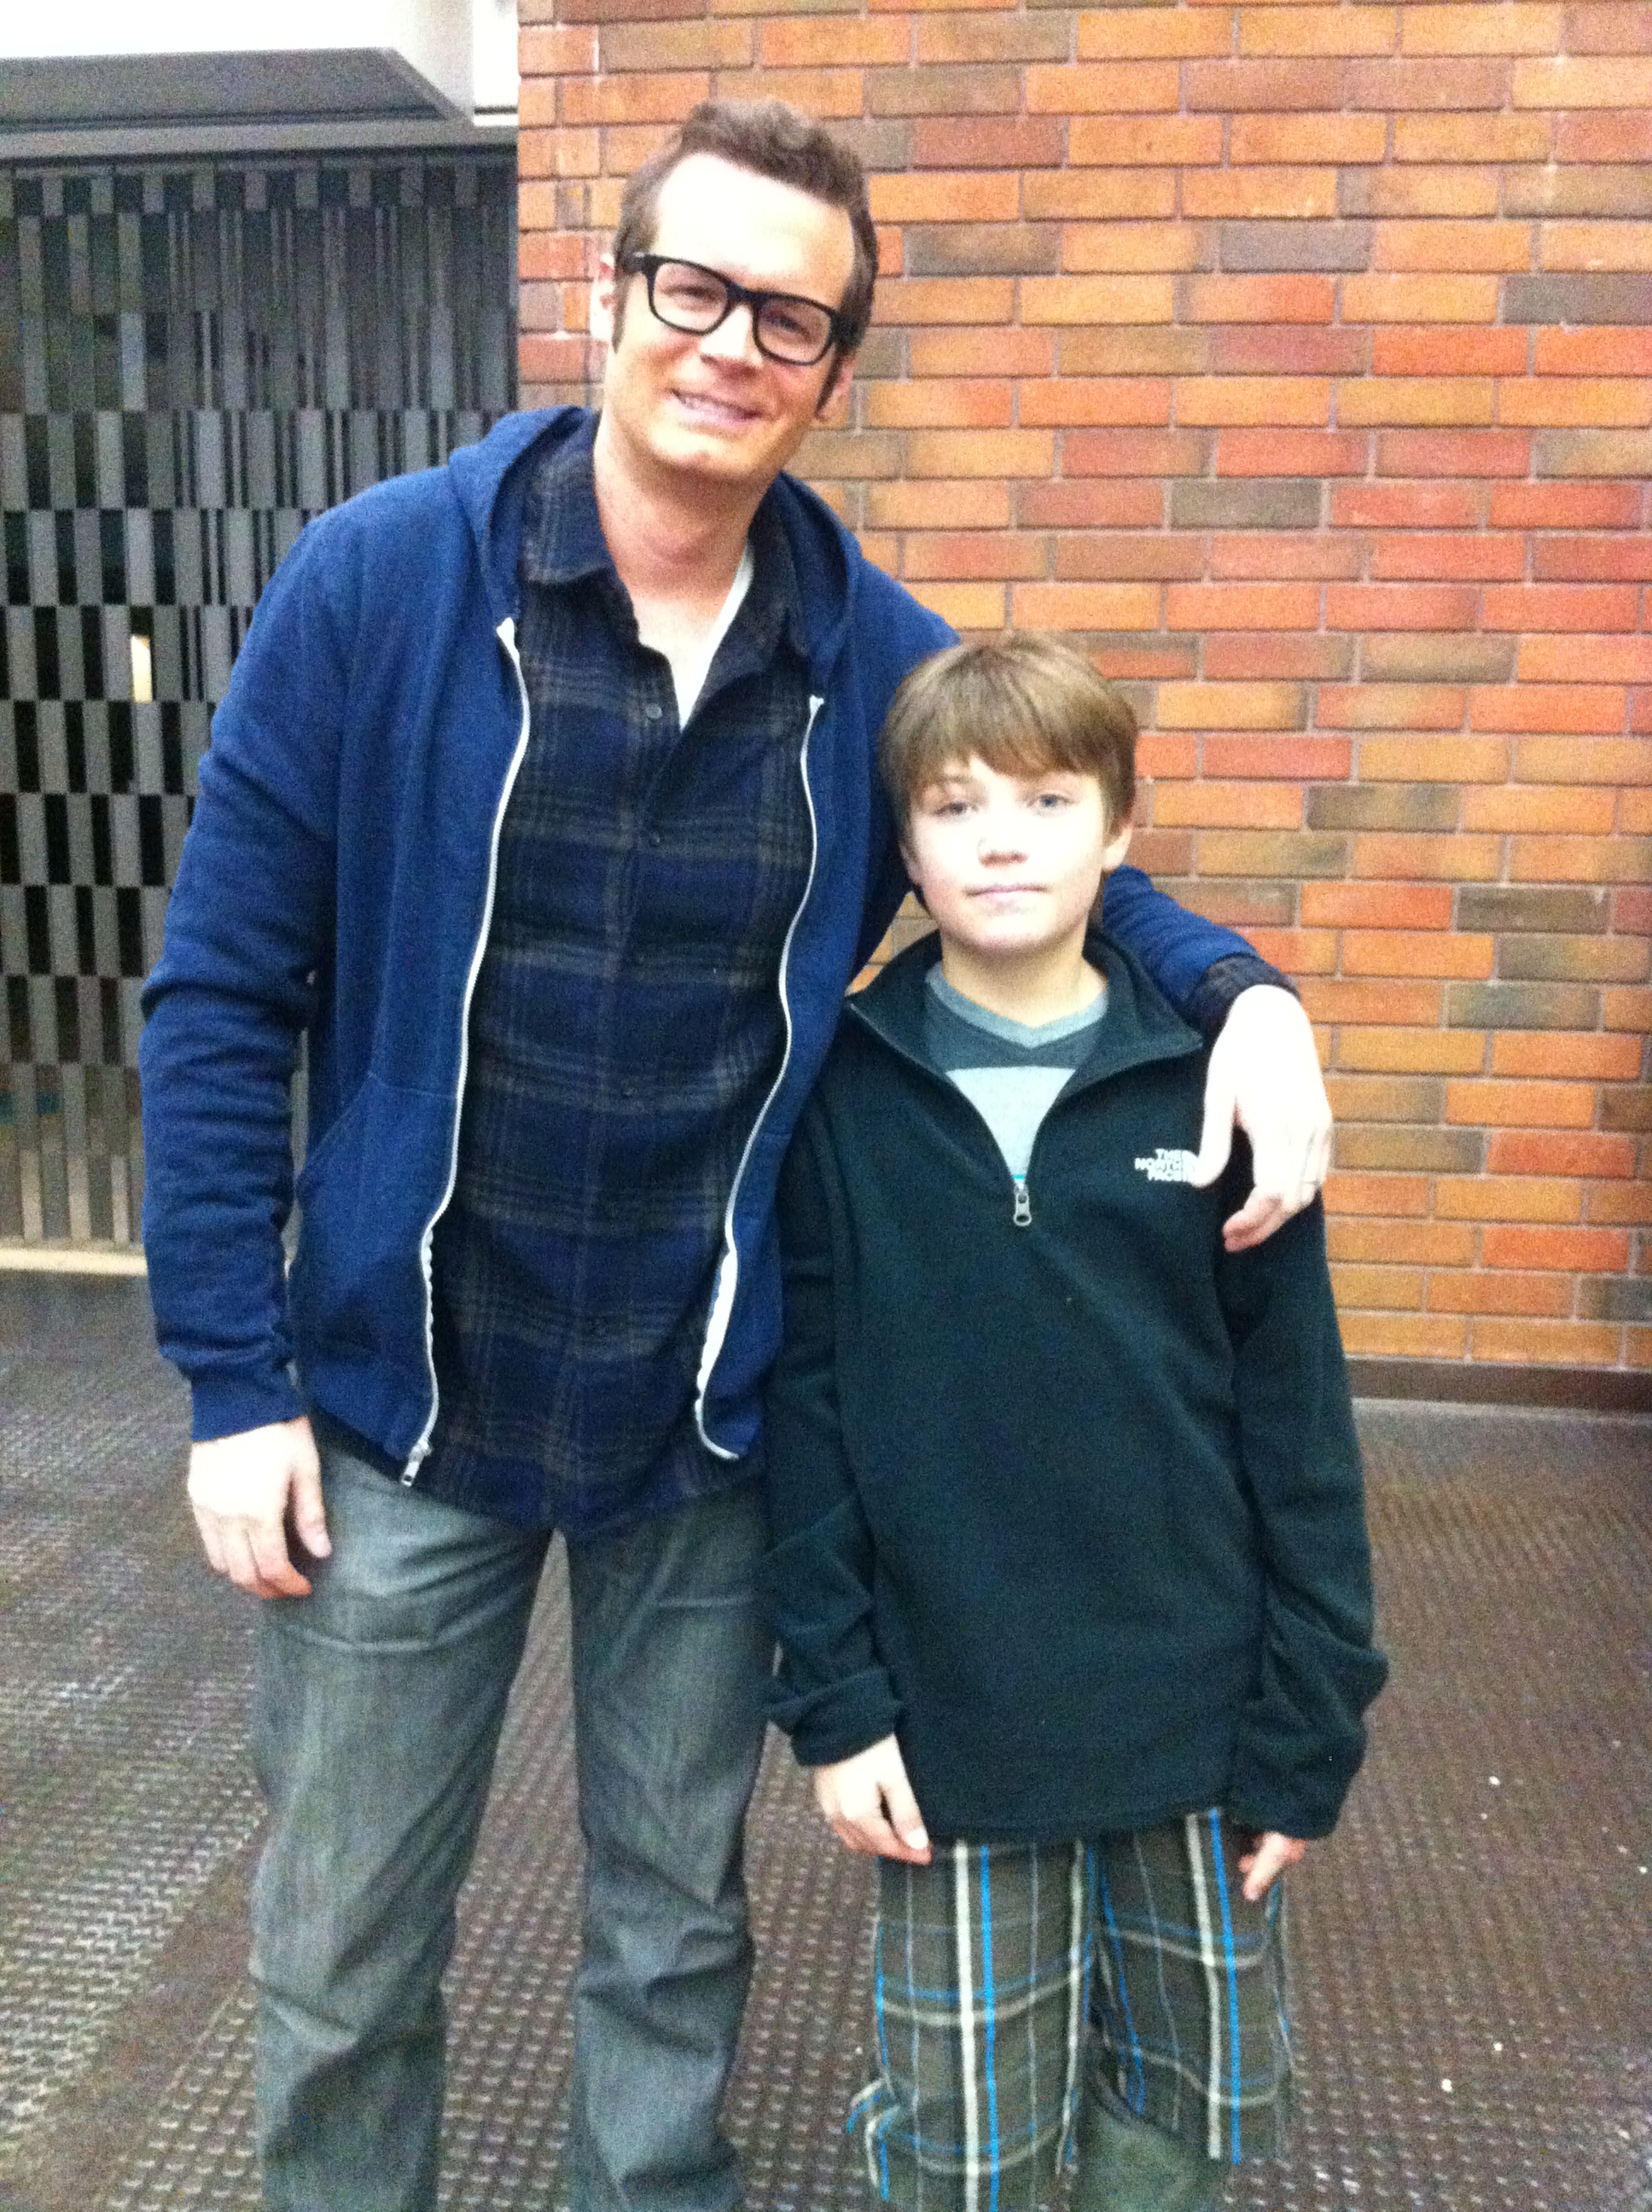 Eric Matheny and me. He plays my dad.